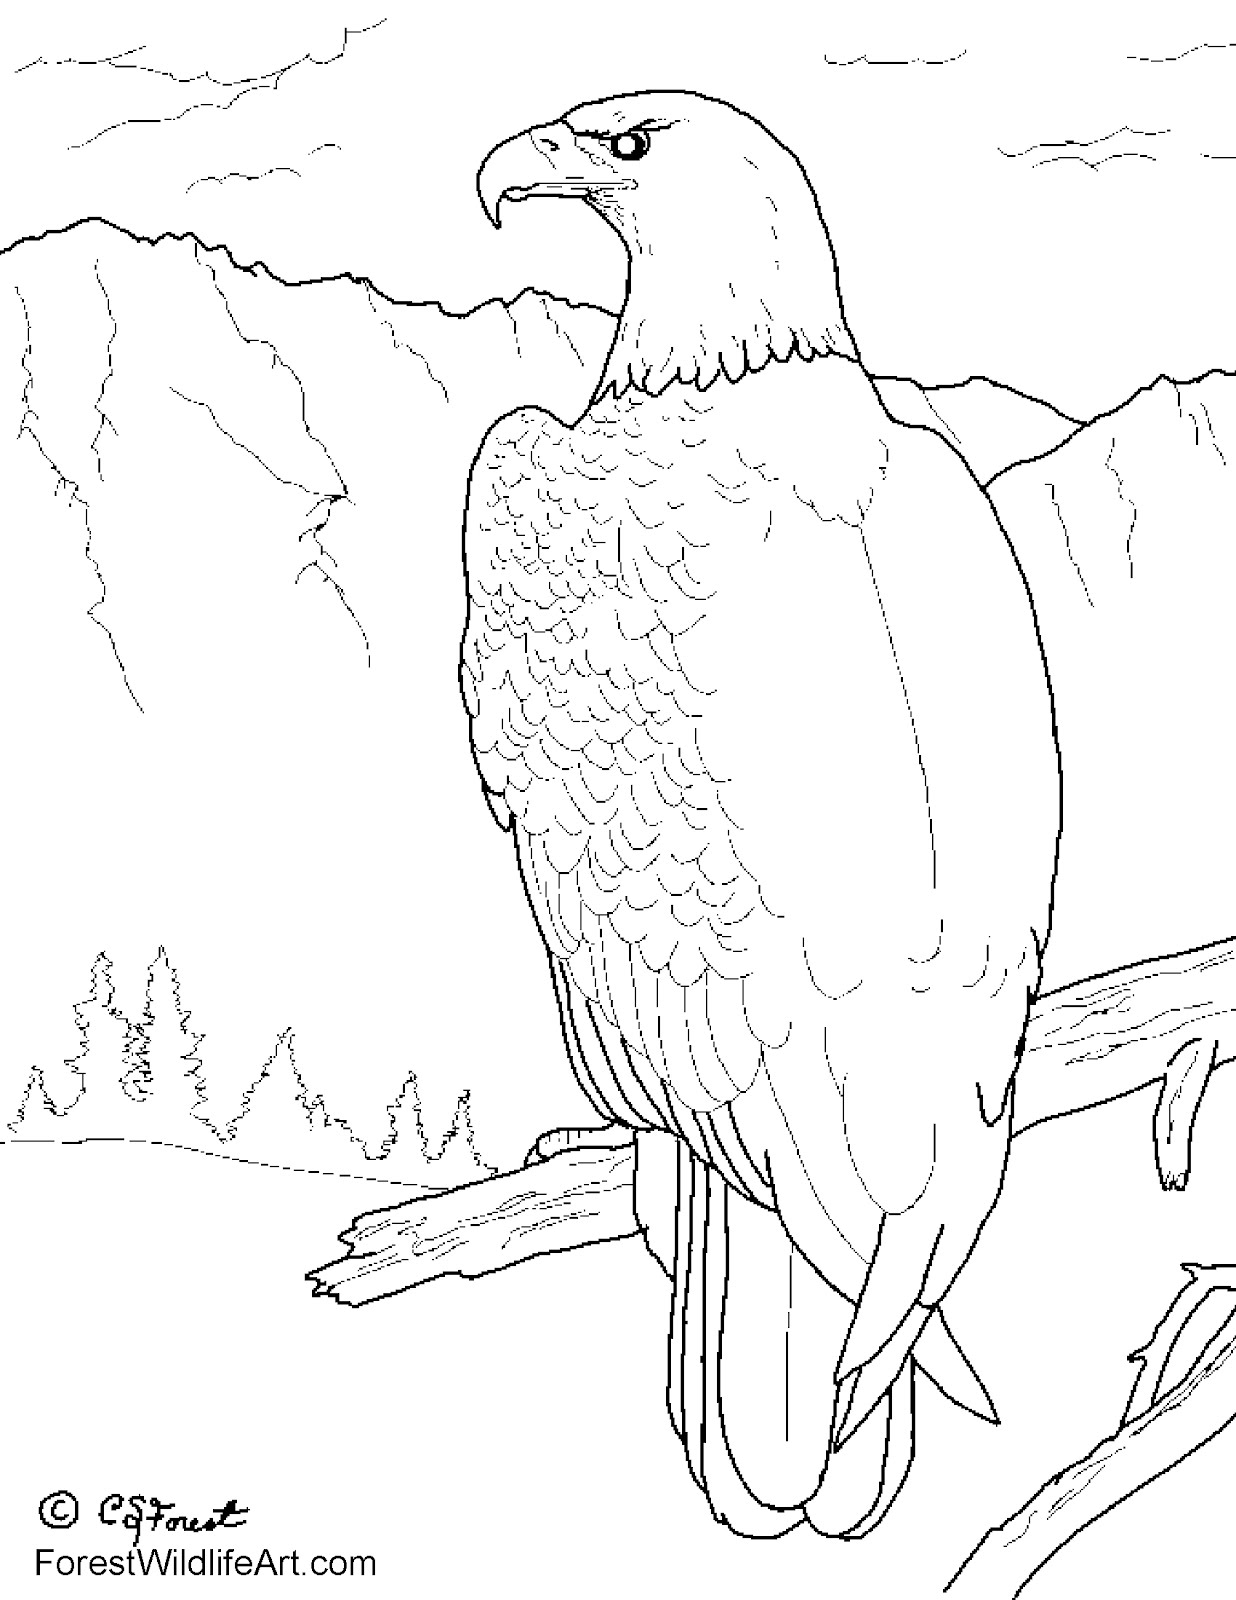 bald eagle coloring page bald eagle coloring page for kids patriotic coloring pages bald page eagle coloring 